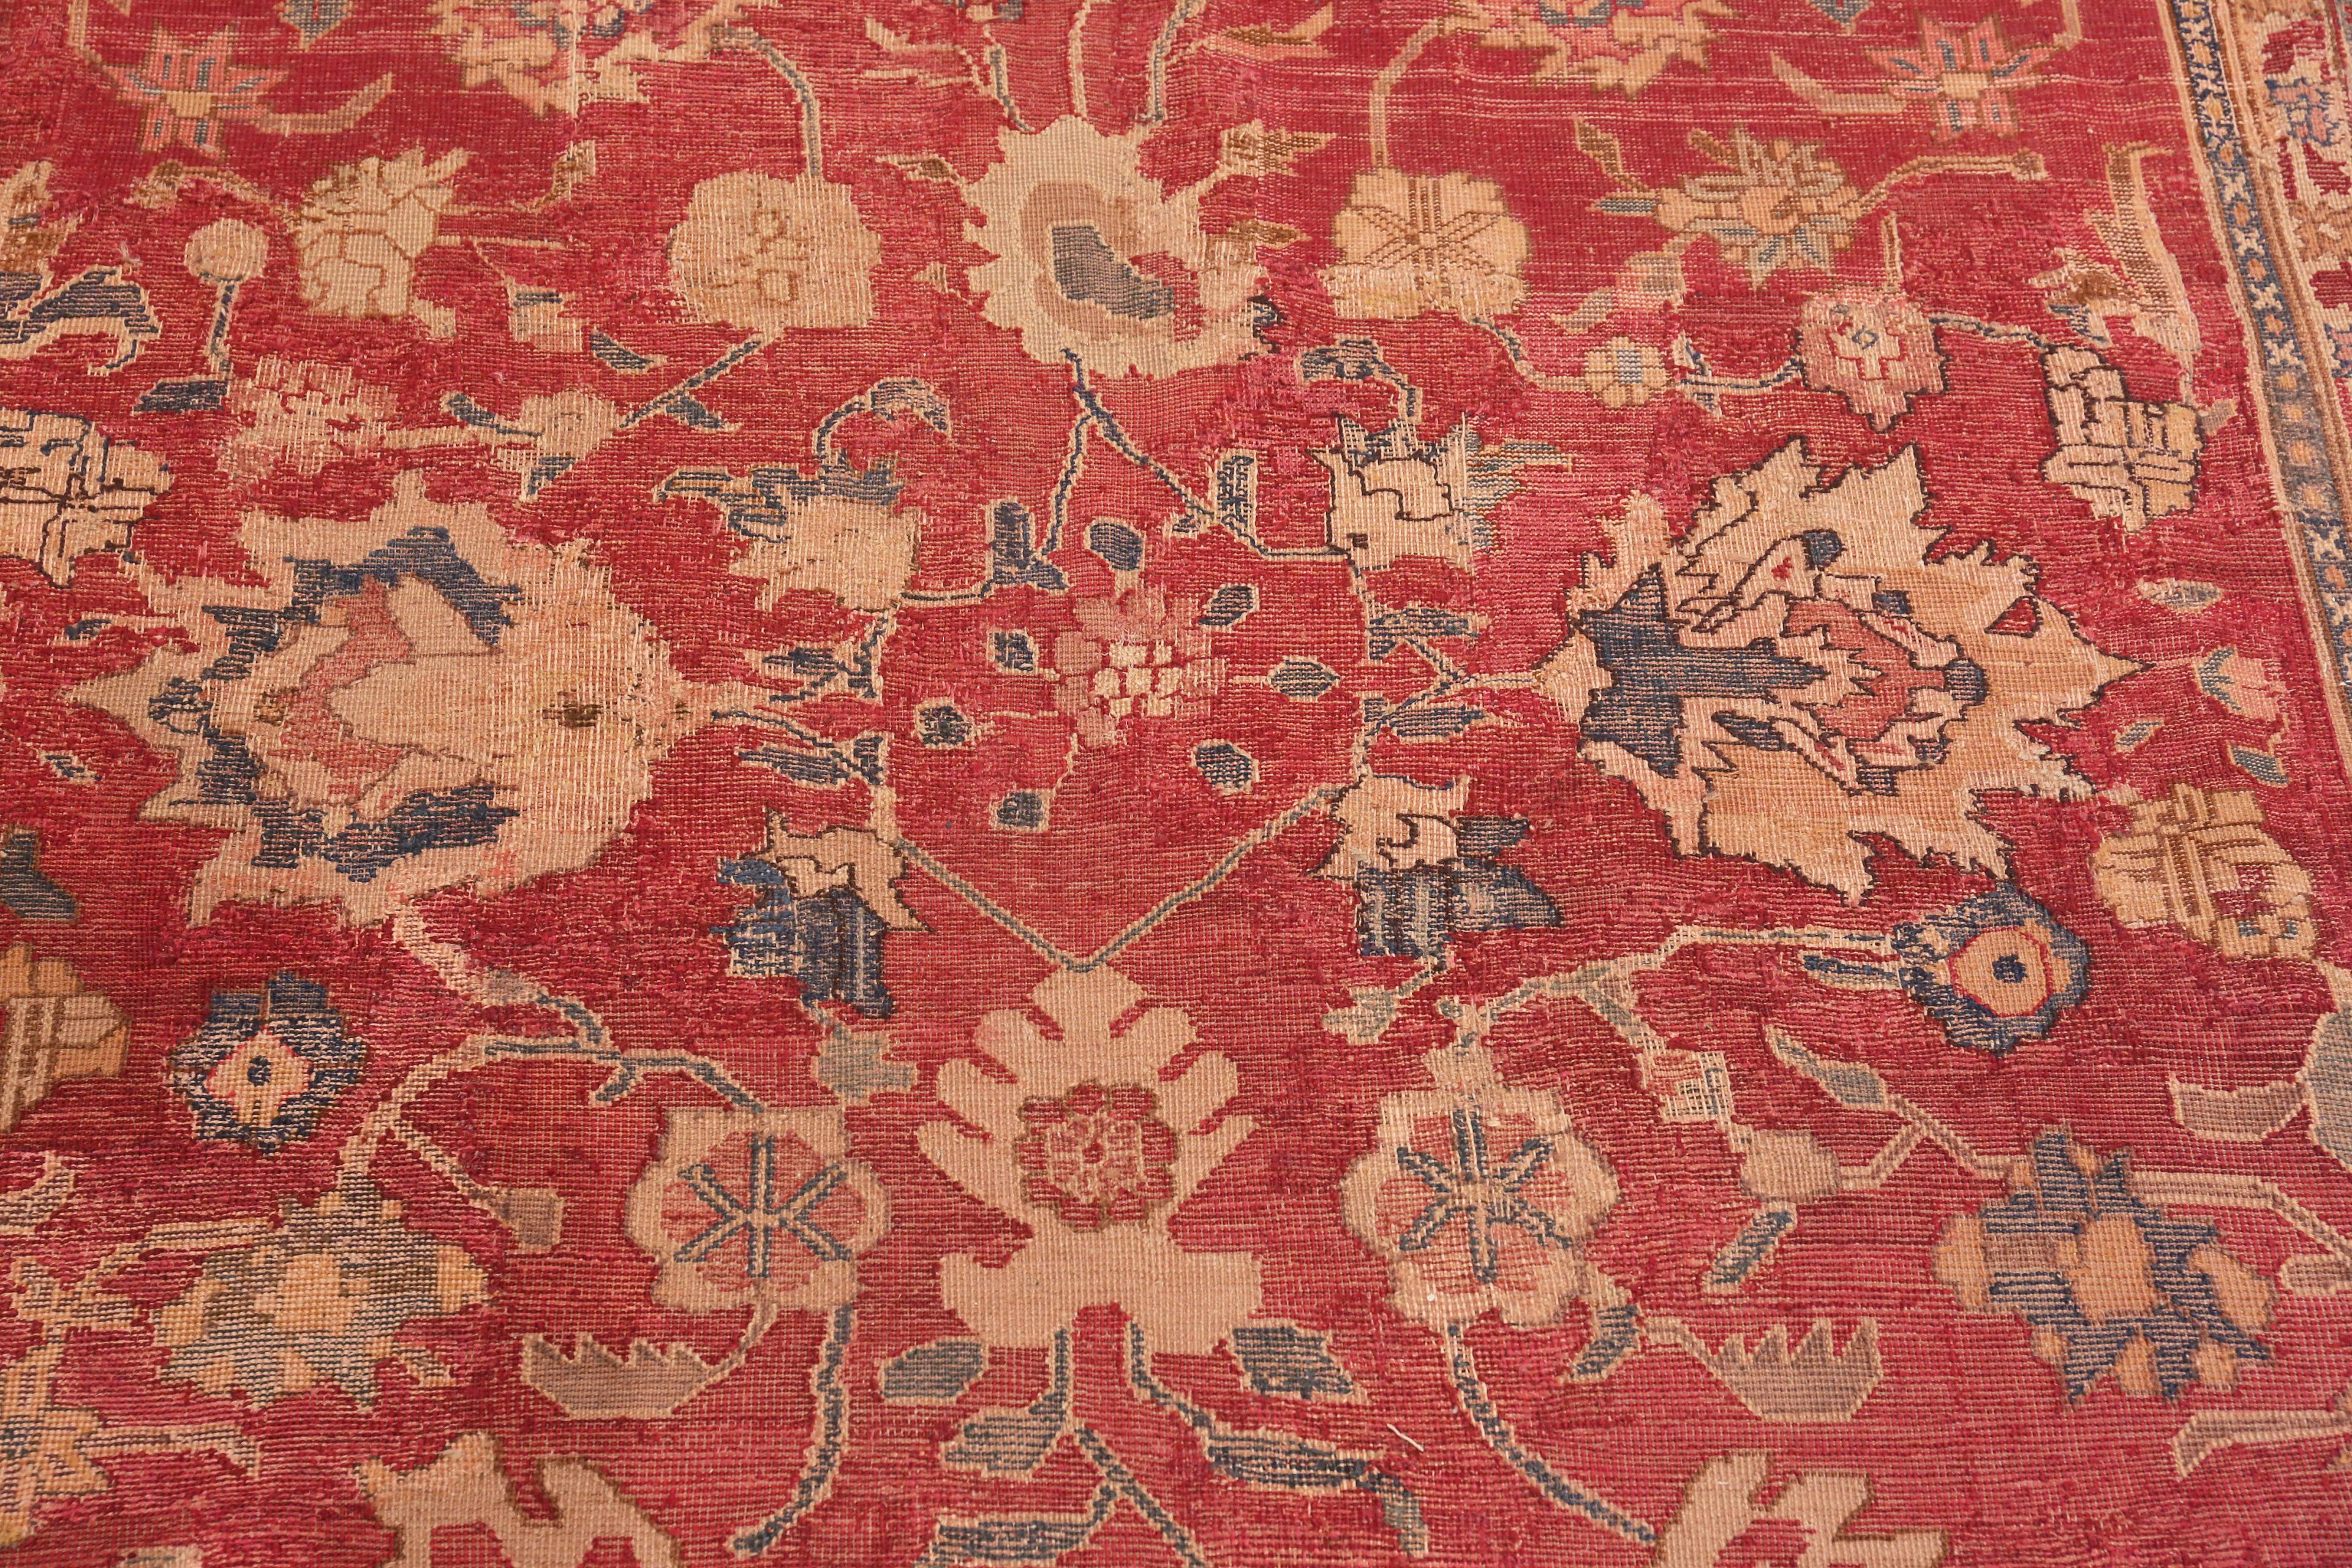 17th Century Antique Indian Mughal Rug 6 ft 7 in x 13 ft In Good Condition For Sale In New York, NY